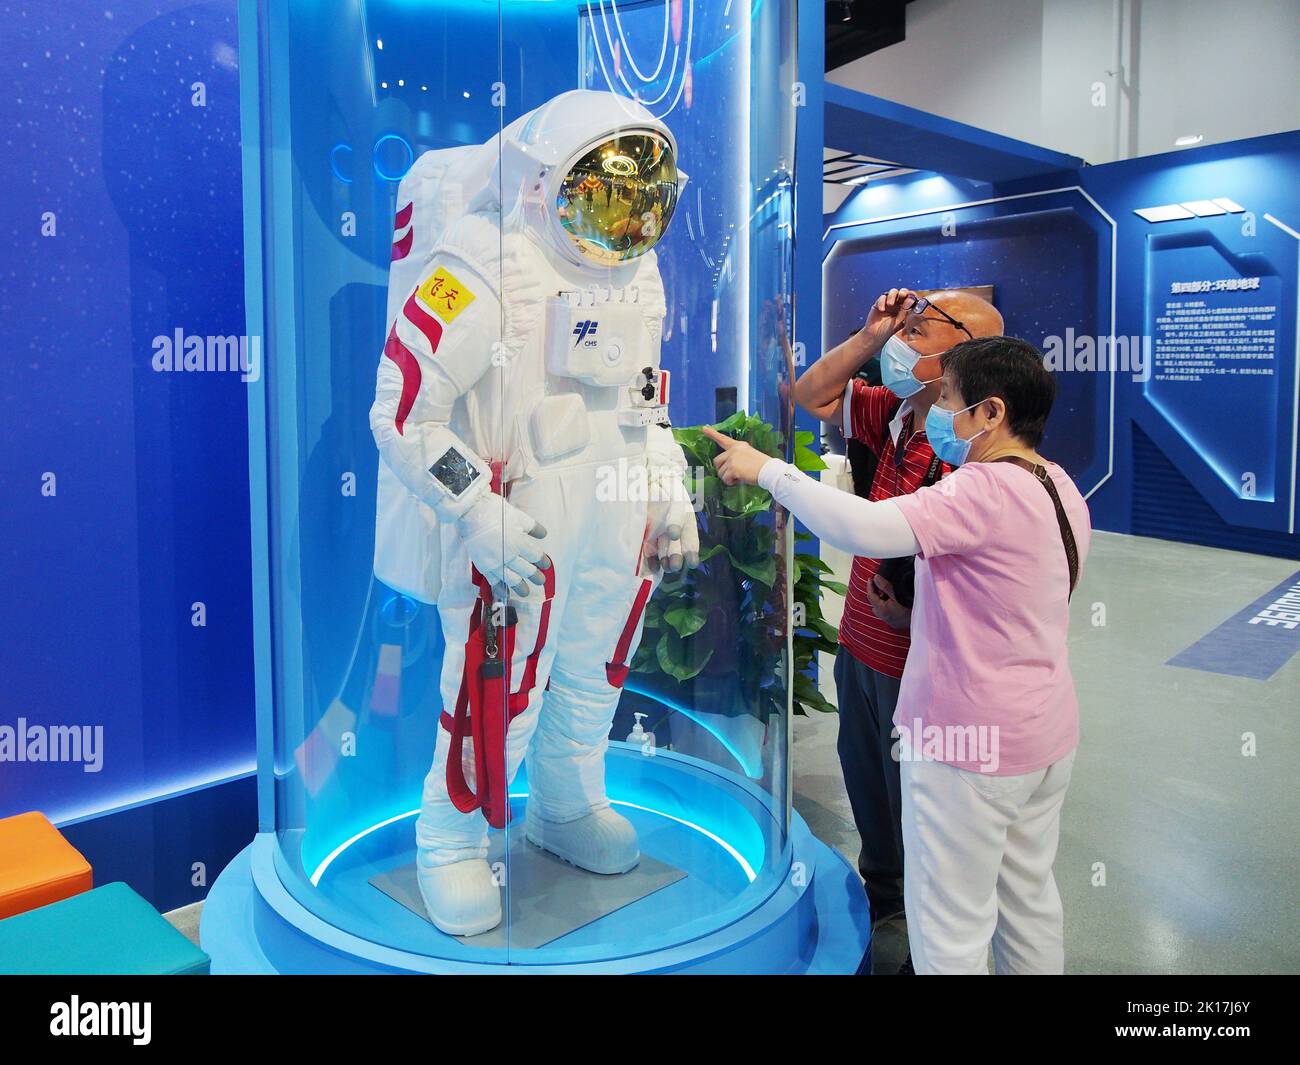 BEIJING, CHINA - SEPTEMBER 16, 2022 - Visitors view astronauts' extravehicular suits at the Science Center in Beijing, China, Sept 16, 2022. The Beiji Stock Photo